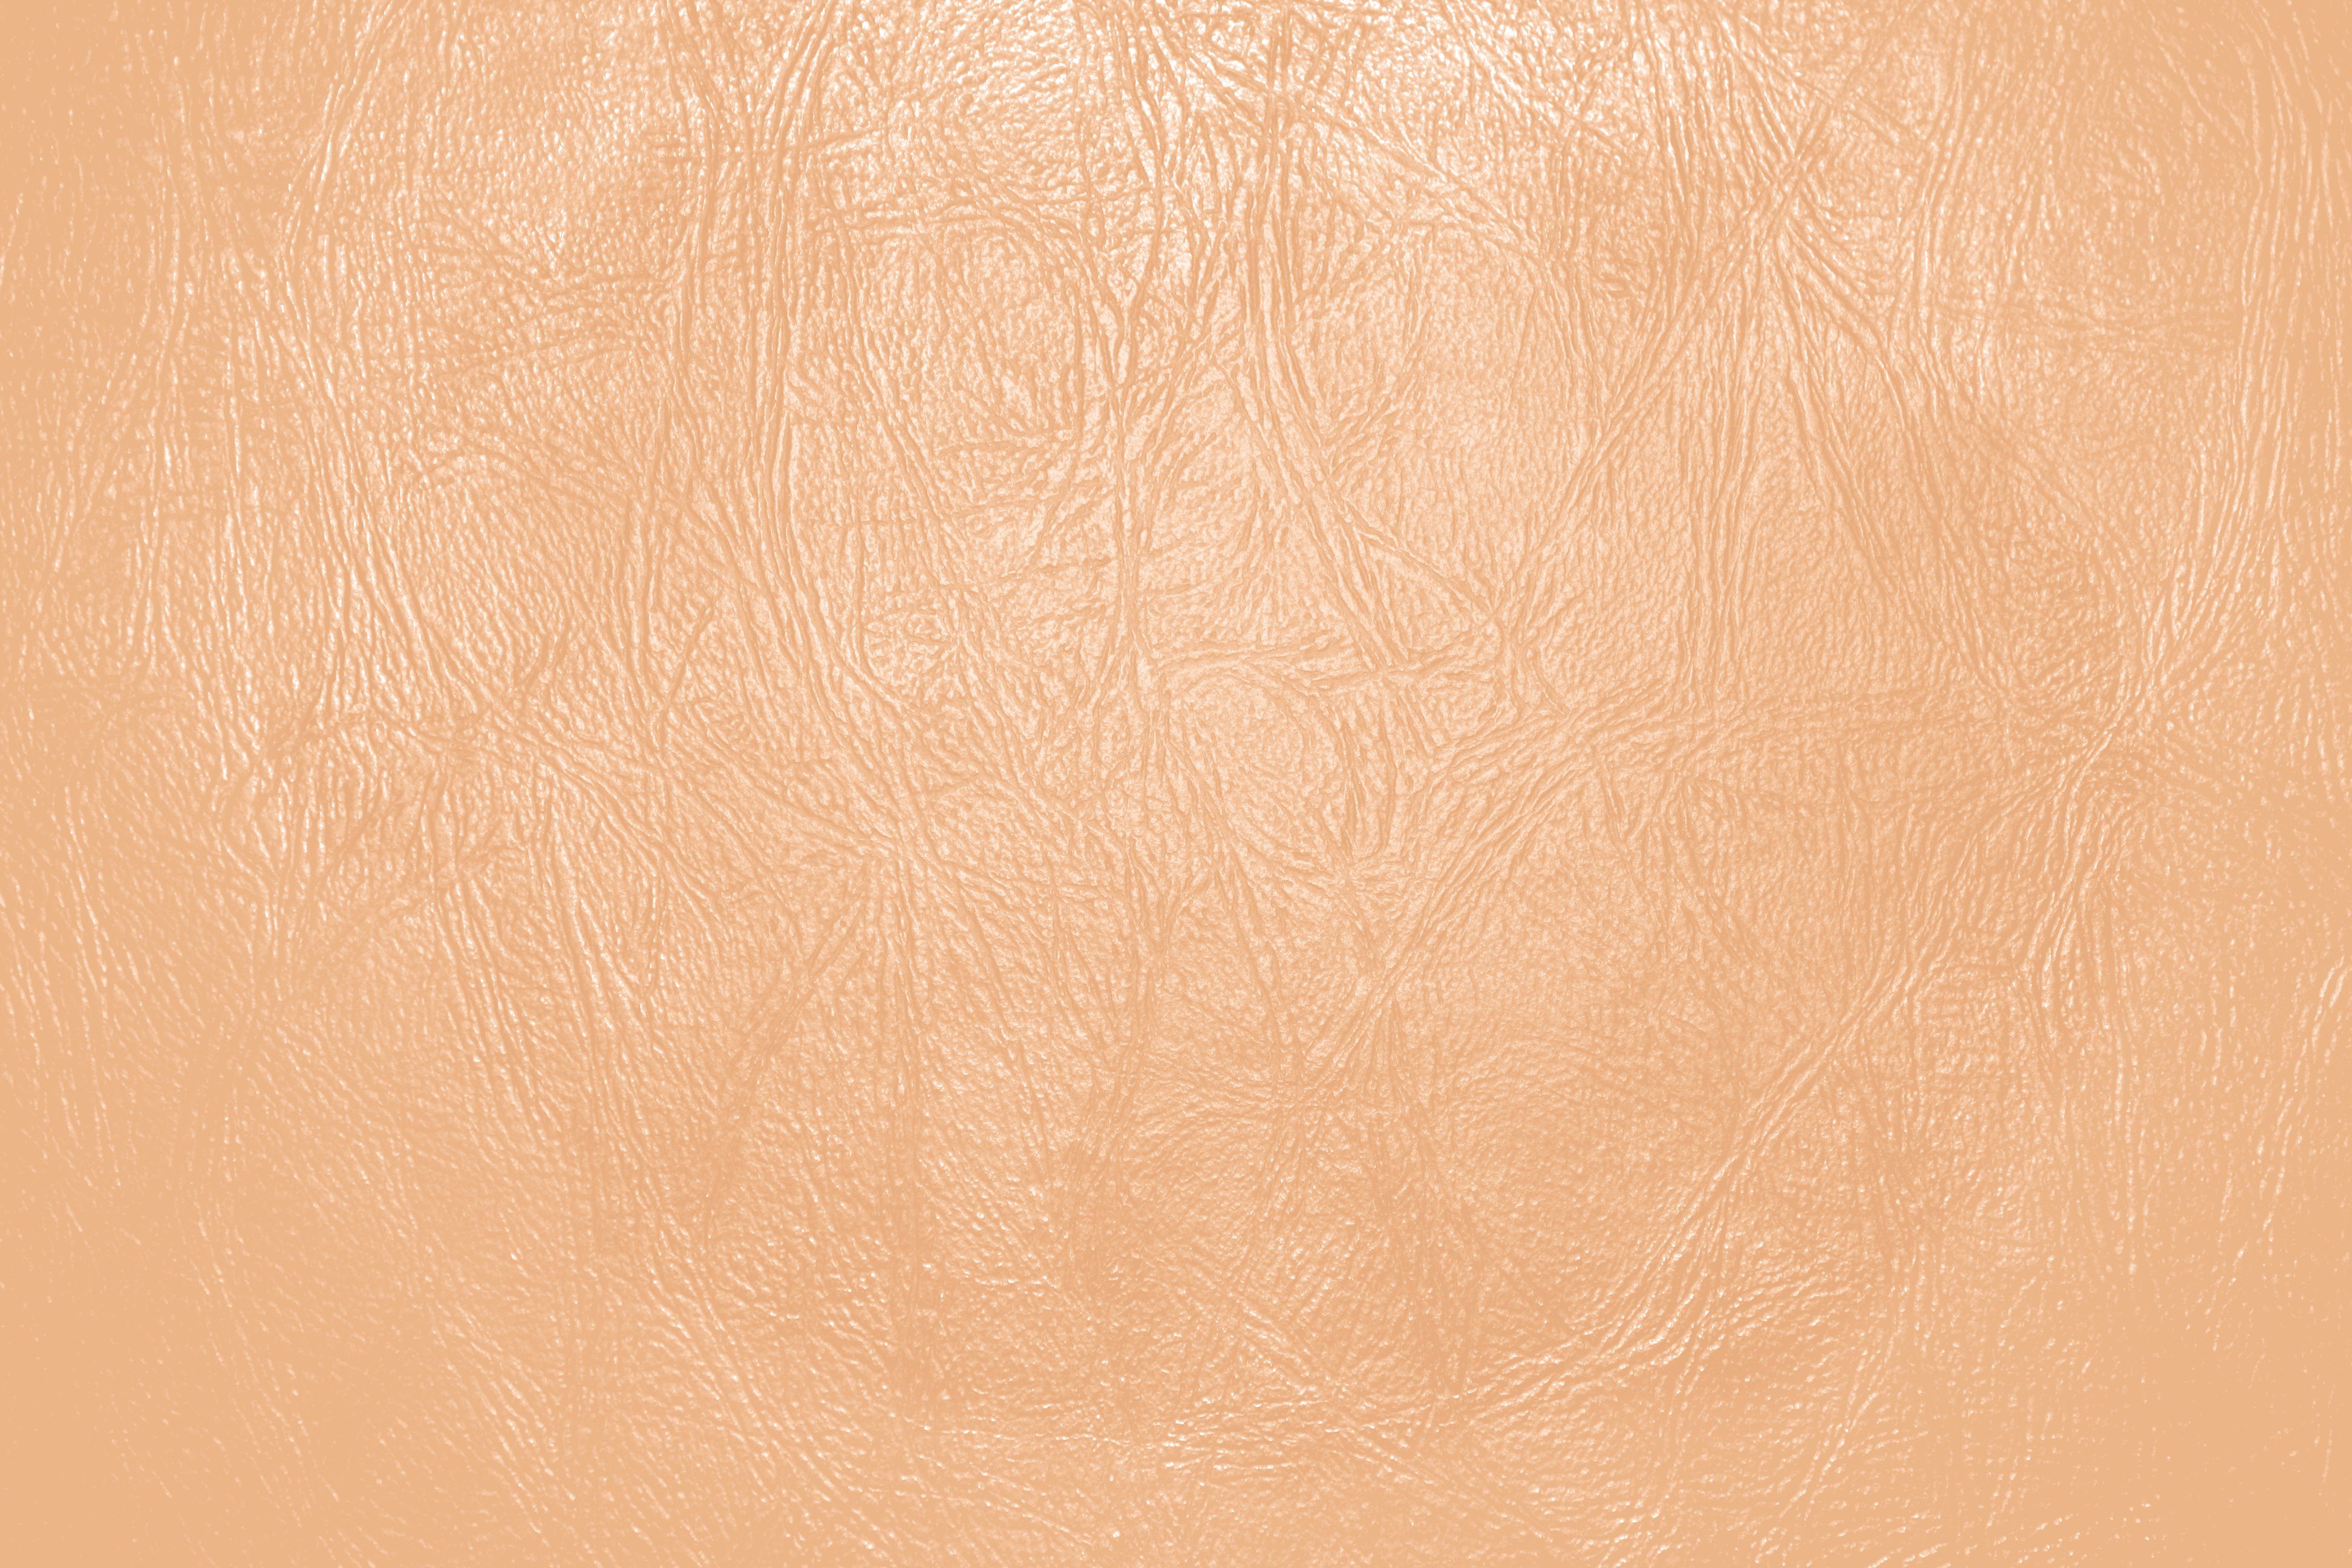 Light Orange or Peach Colored Leather Close Up Texture Picture